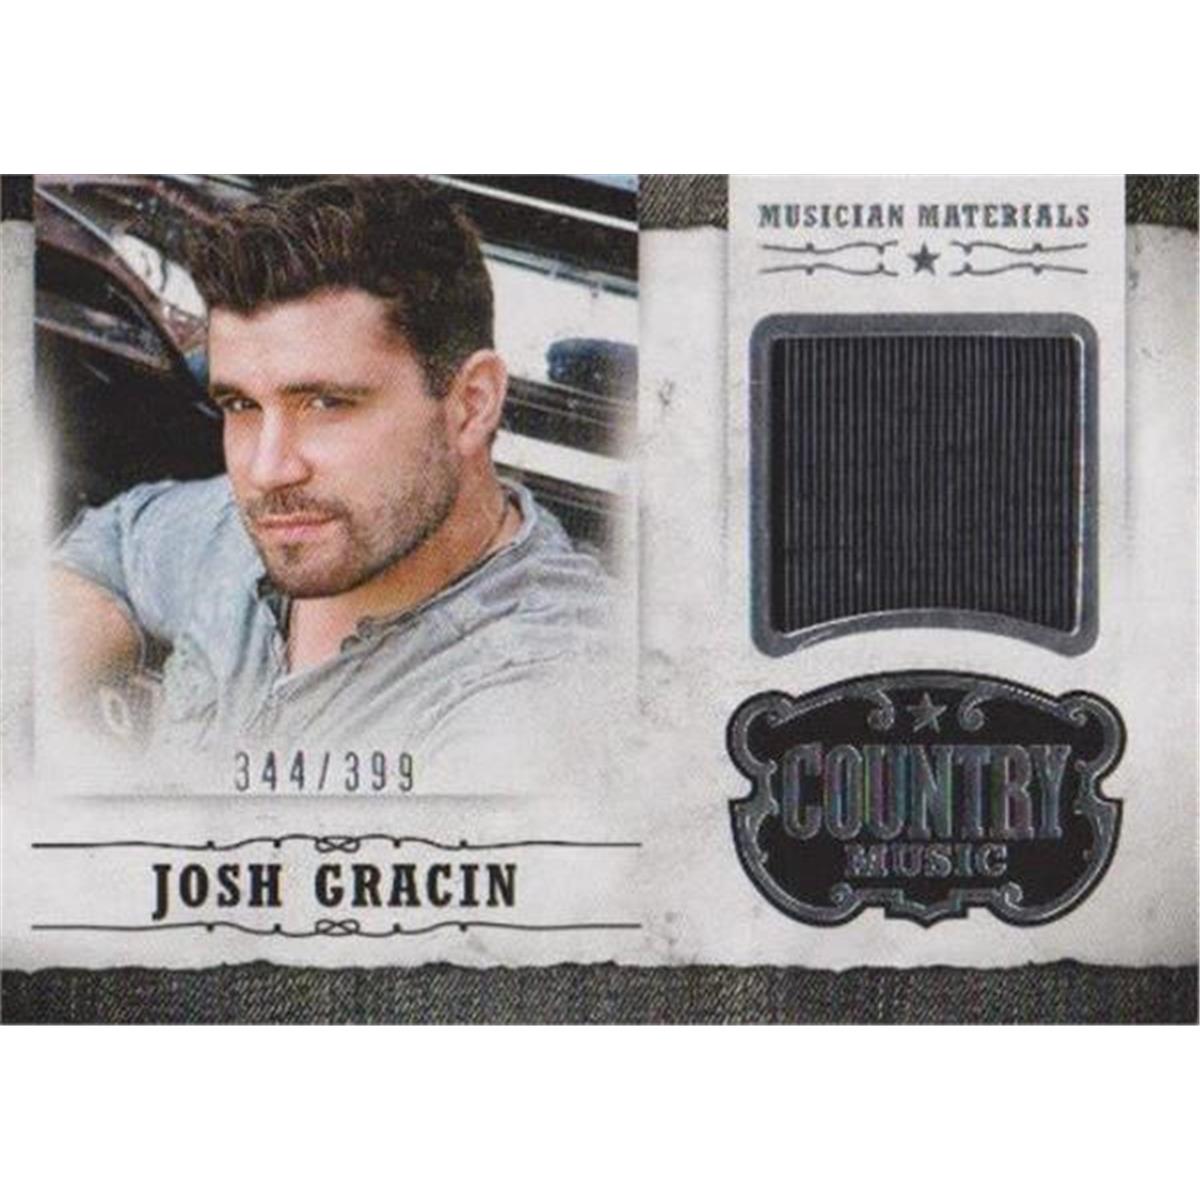 Picture of Autograph Warehouse 409063 Josh Gracin Musician Worn Material Relic Patch Trading Card - 2014 Panini MJG LE 344-399